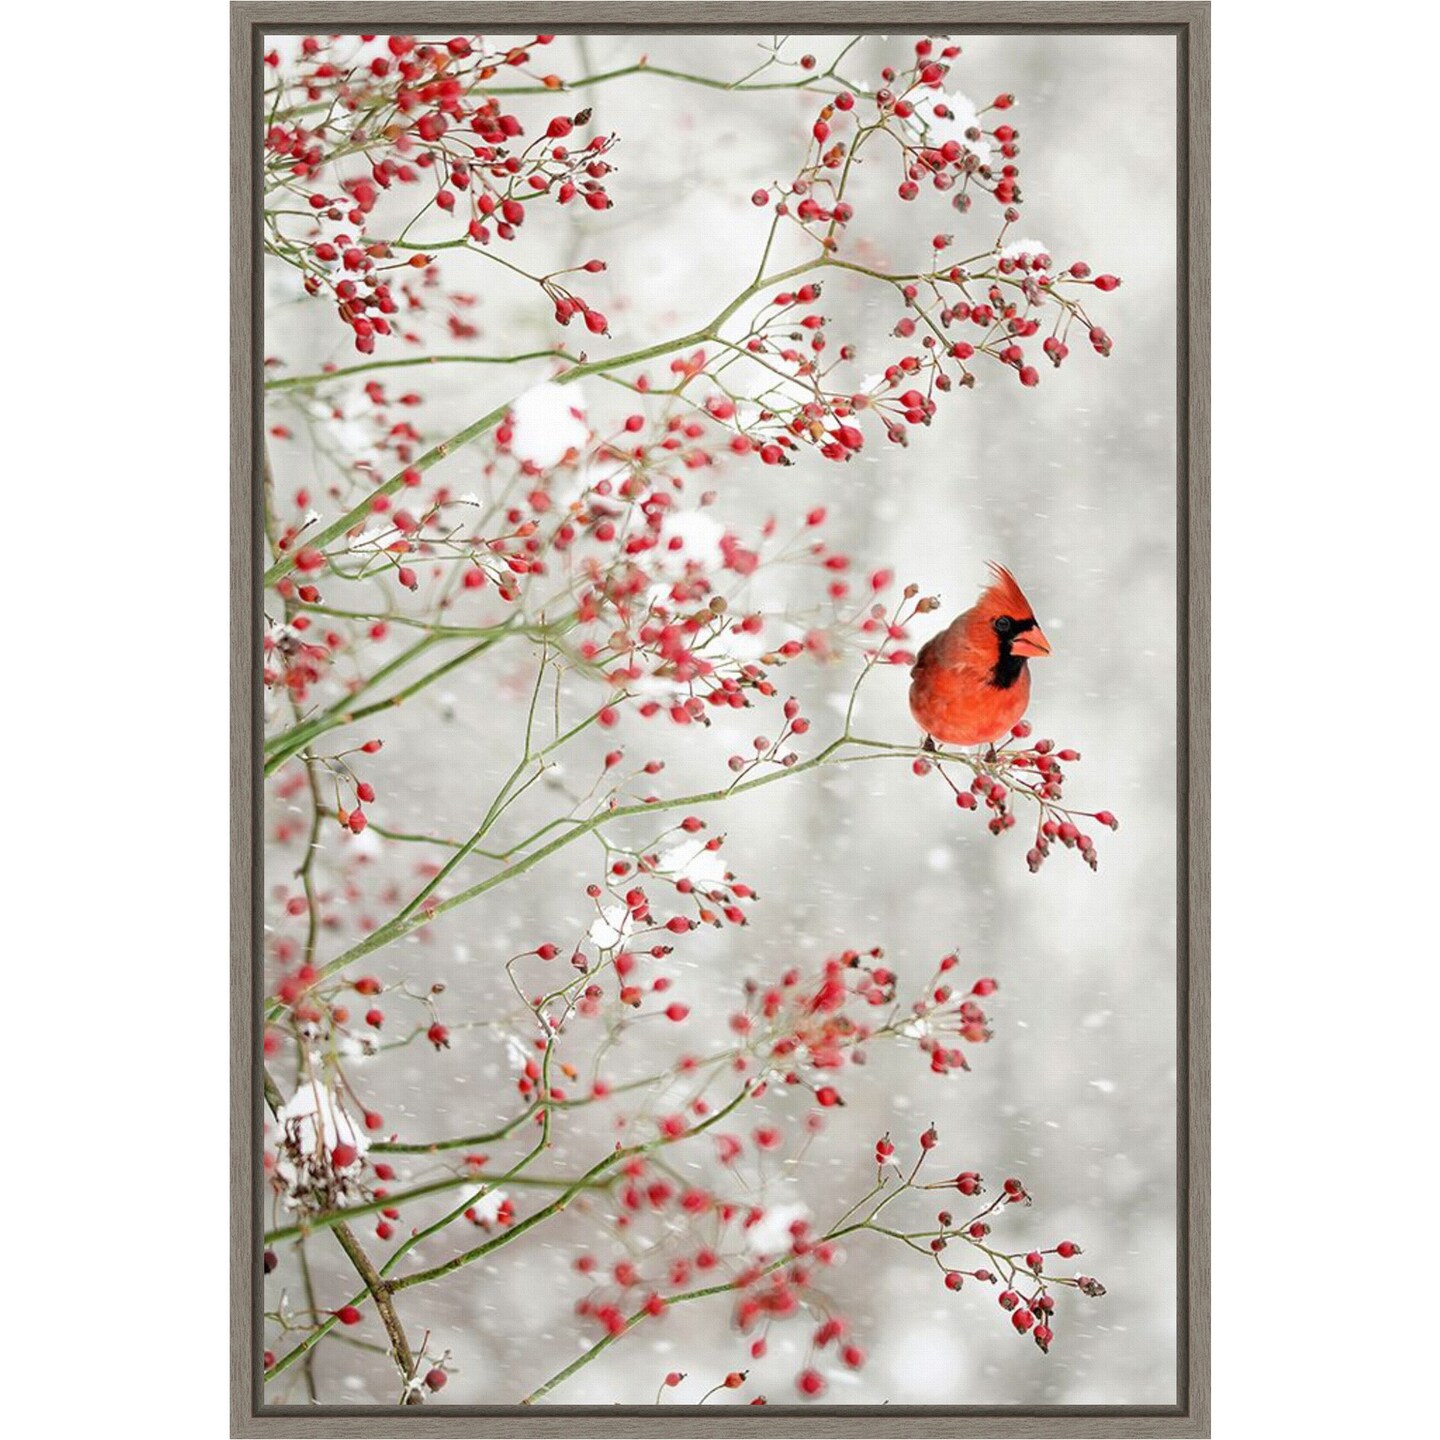 Red Cardinal and Red Berries by Carrie Ann Grippo-pike Canvas Art Framed